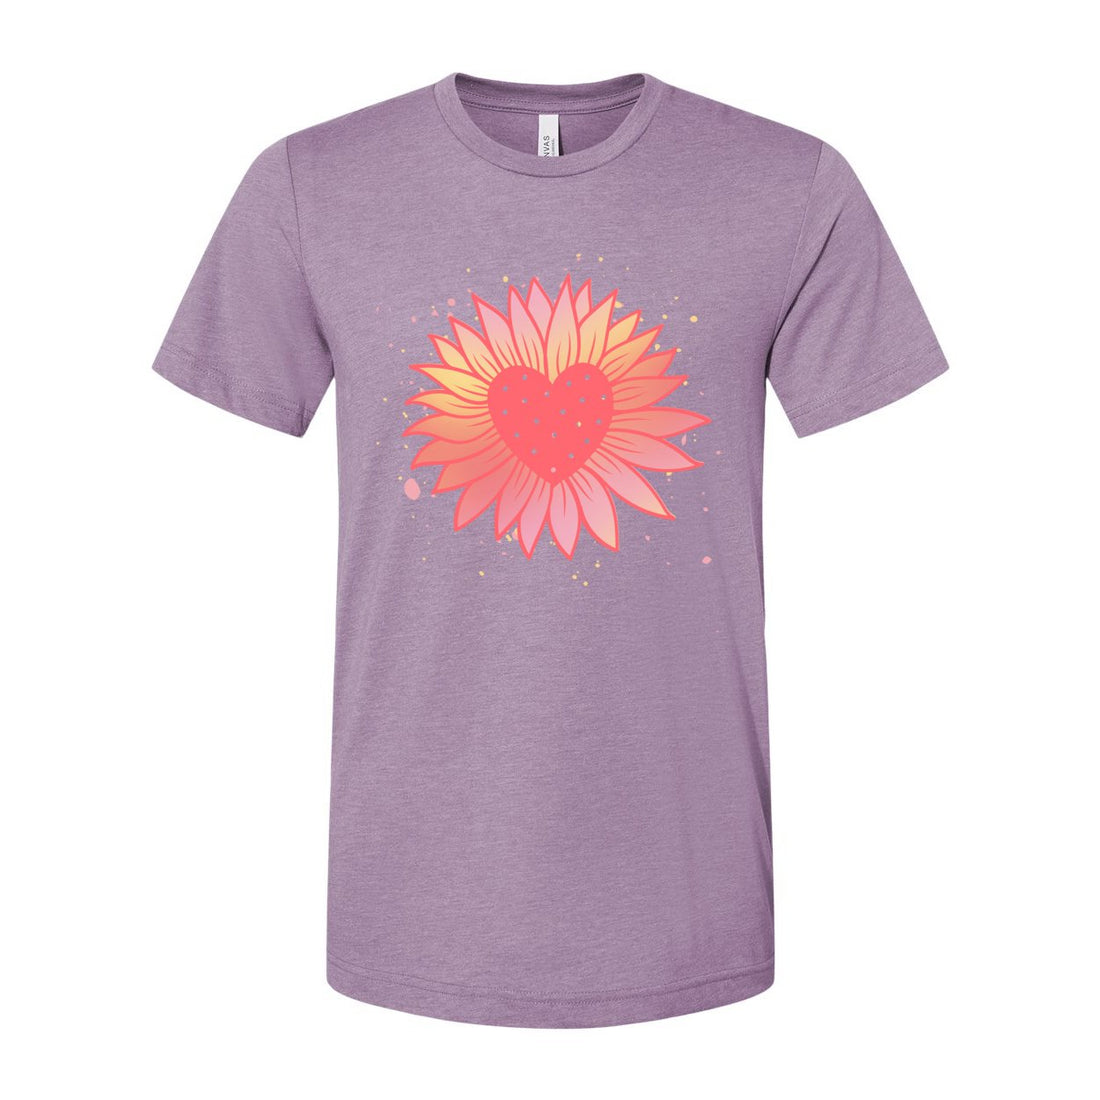 Sunny Sunflower Jersey Tee - T-Shirts - Positively Sassy - Sunny Sunflower Jersey Tee